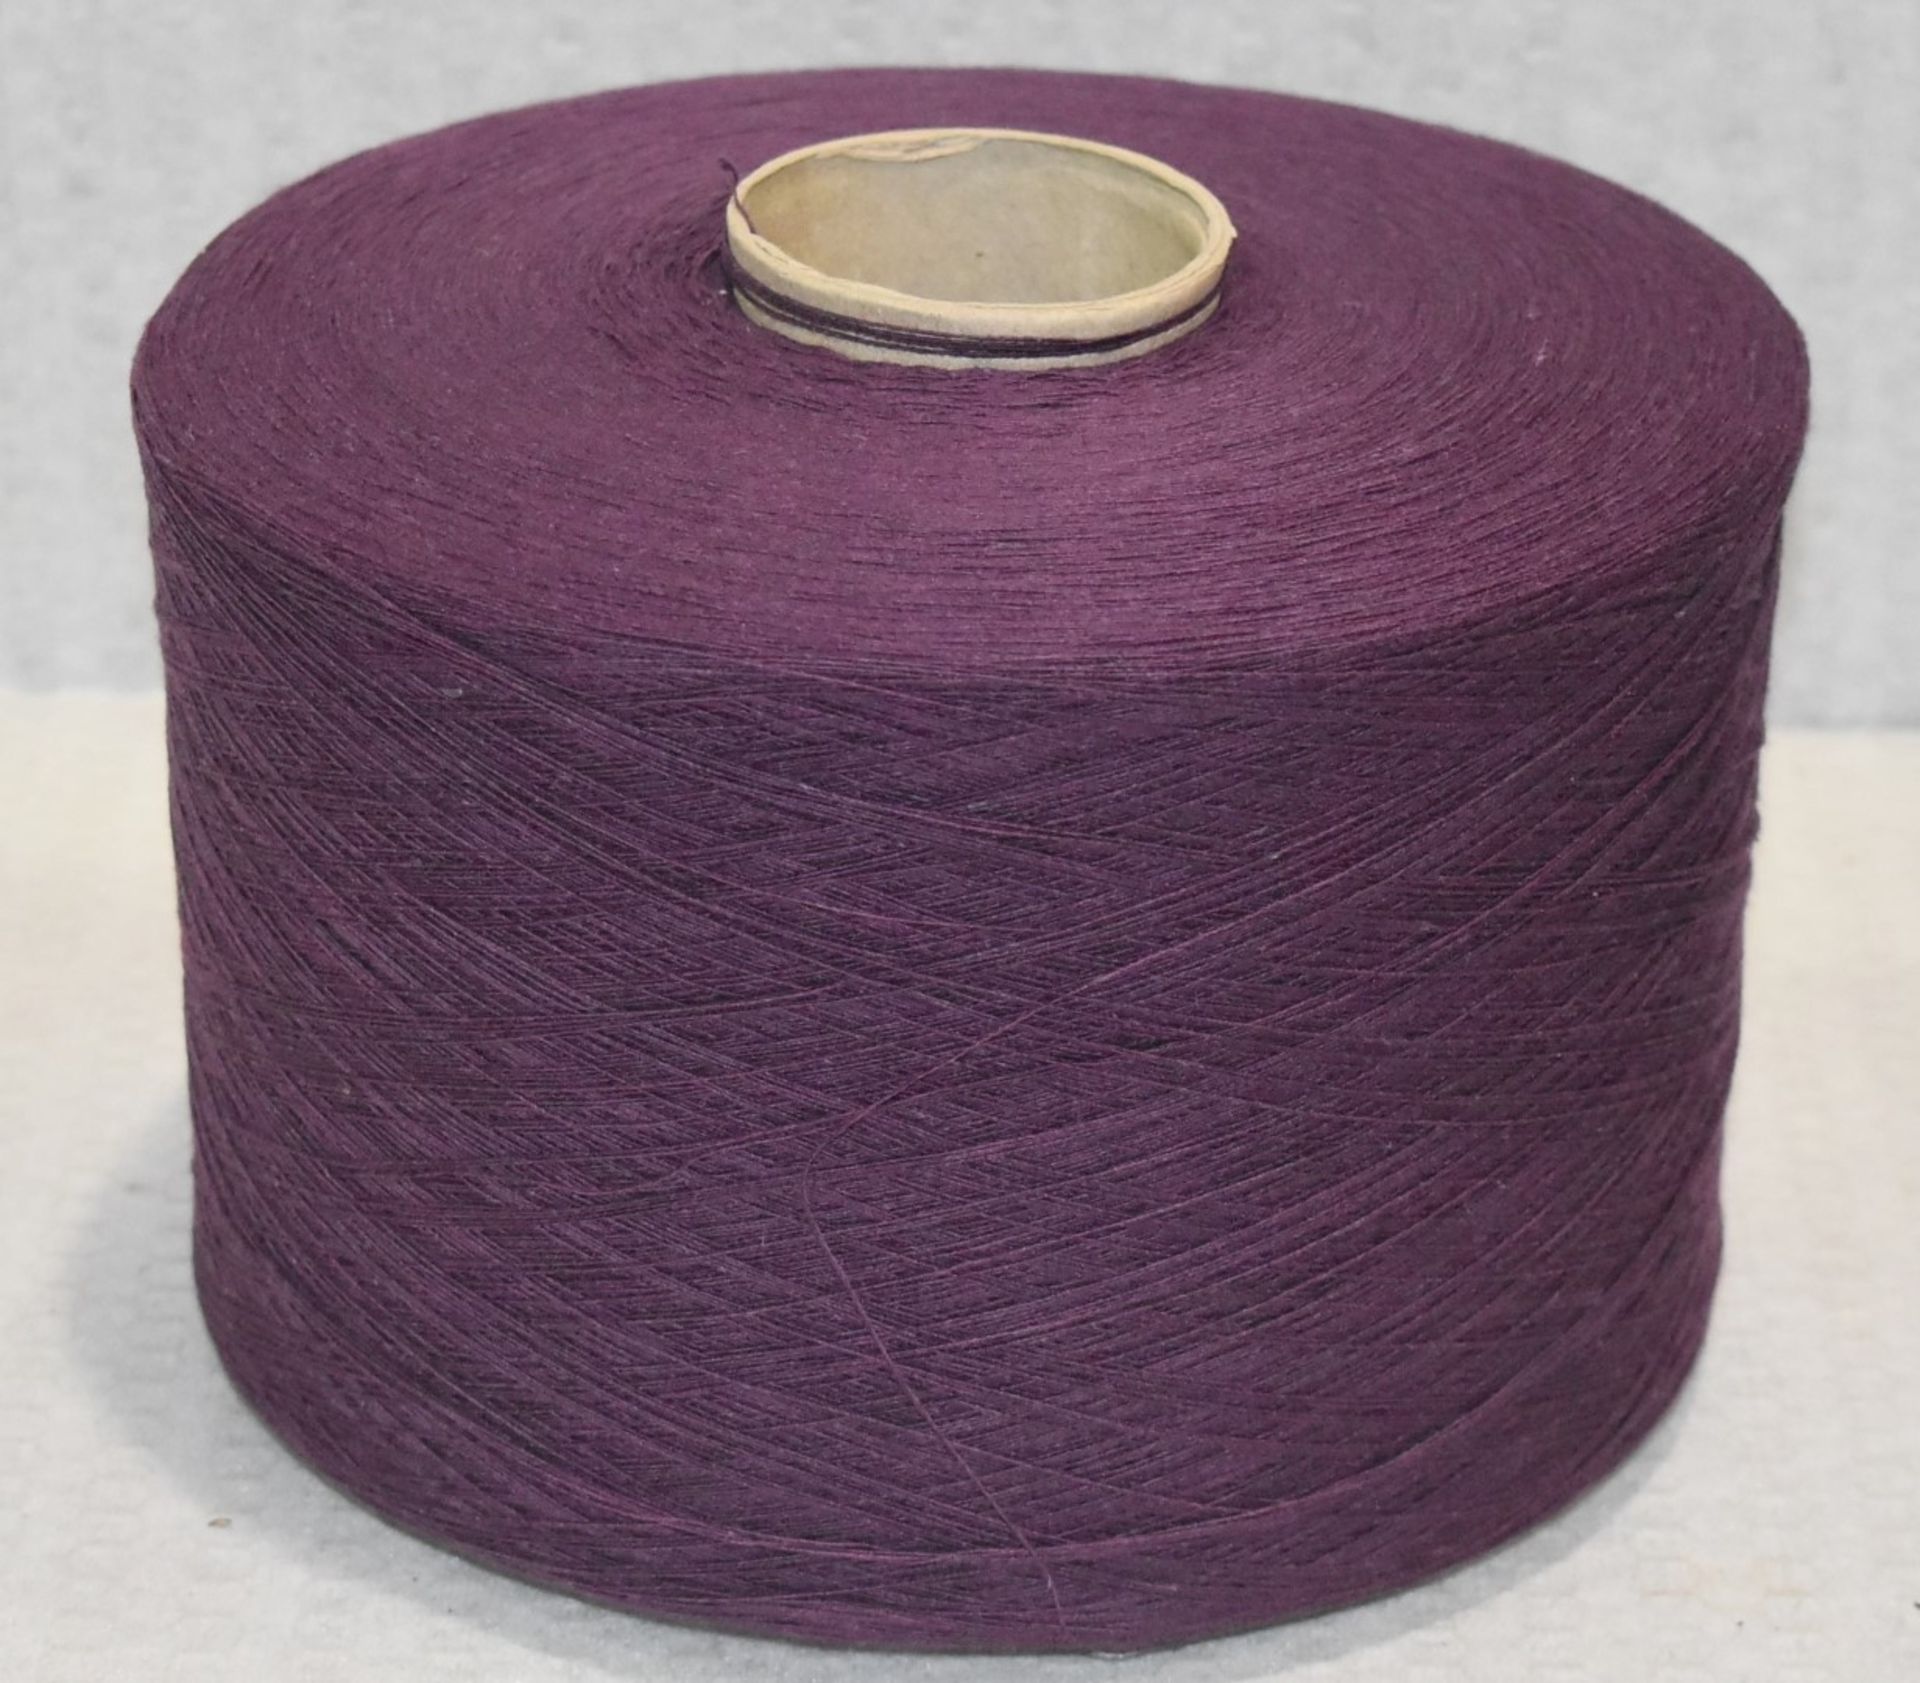 6 x Cones of 1/13 MicroCotton Knitting Yarn - Purple - Approx Weight: 2,300g - New Stock ABL Yarn - Image 5 of 15